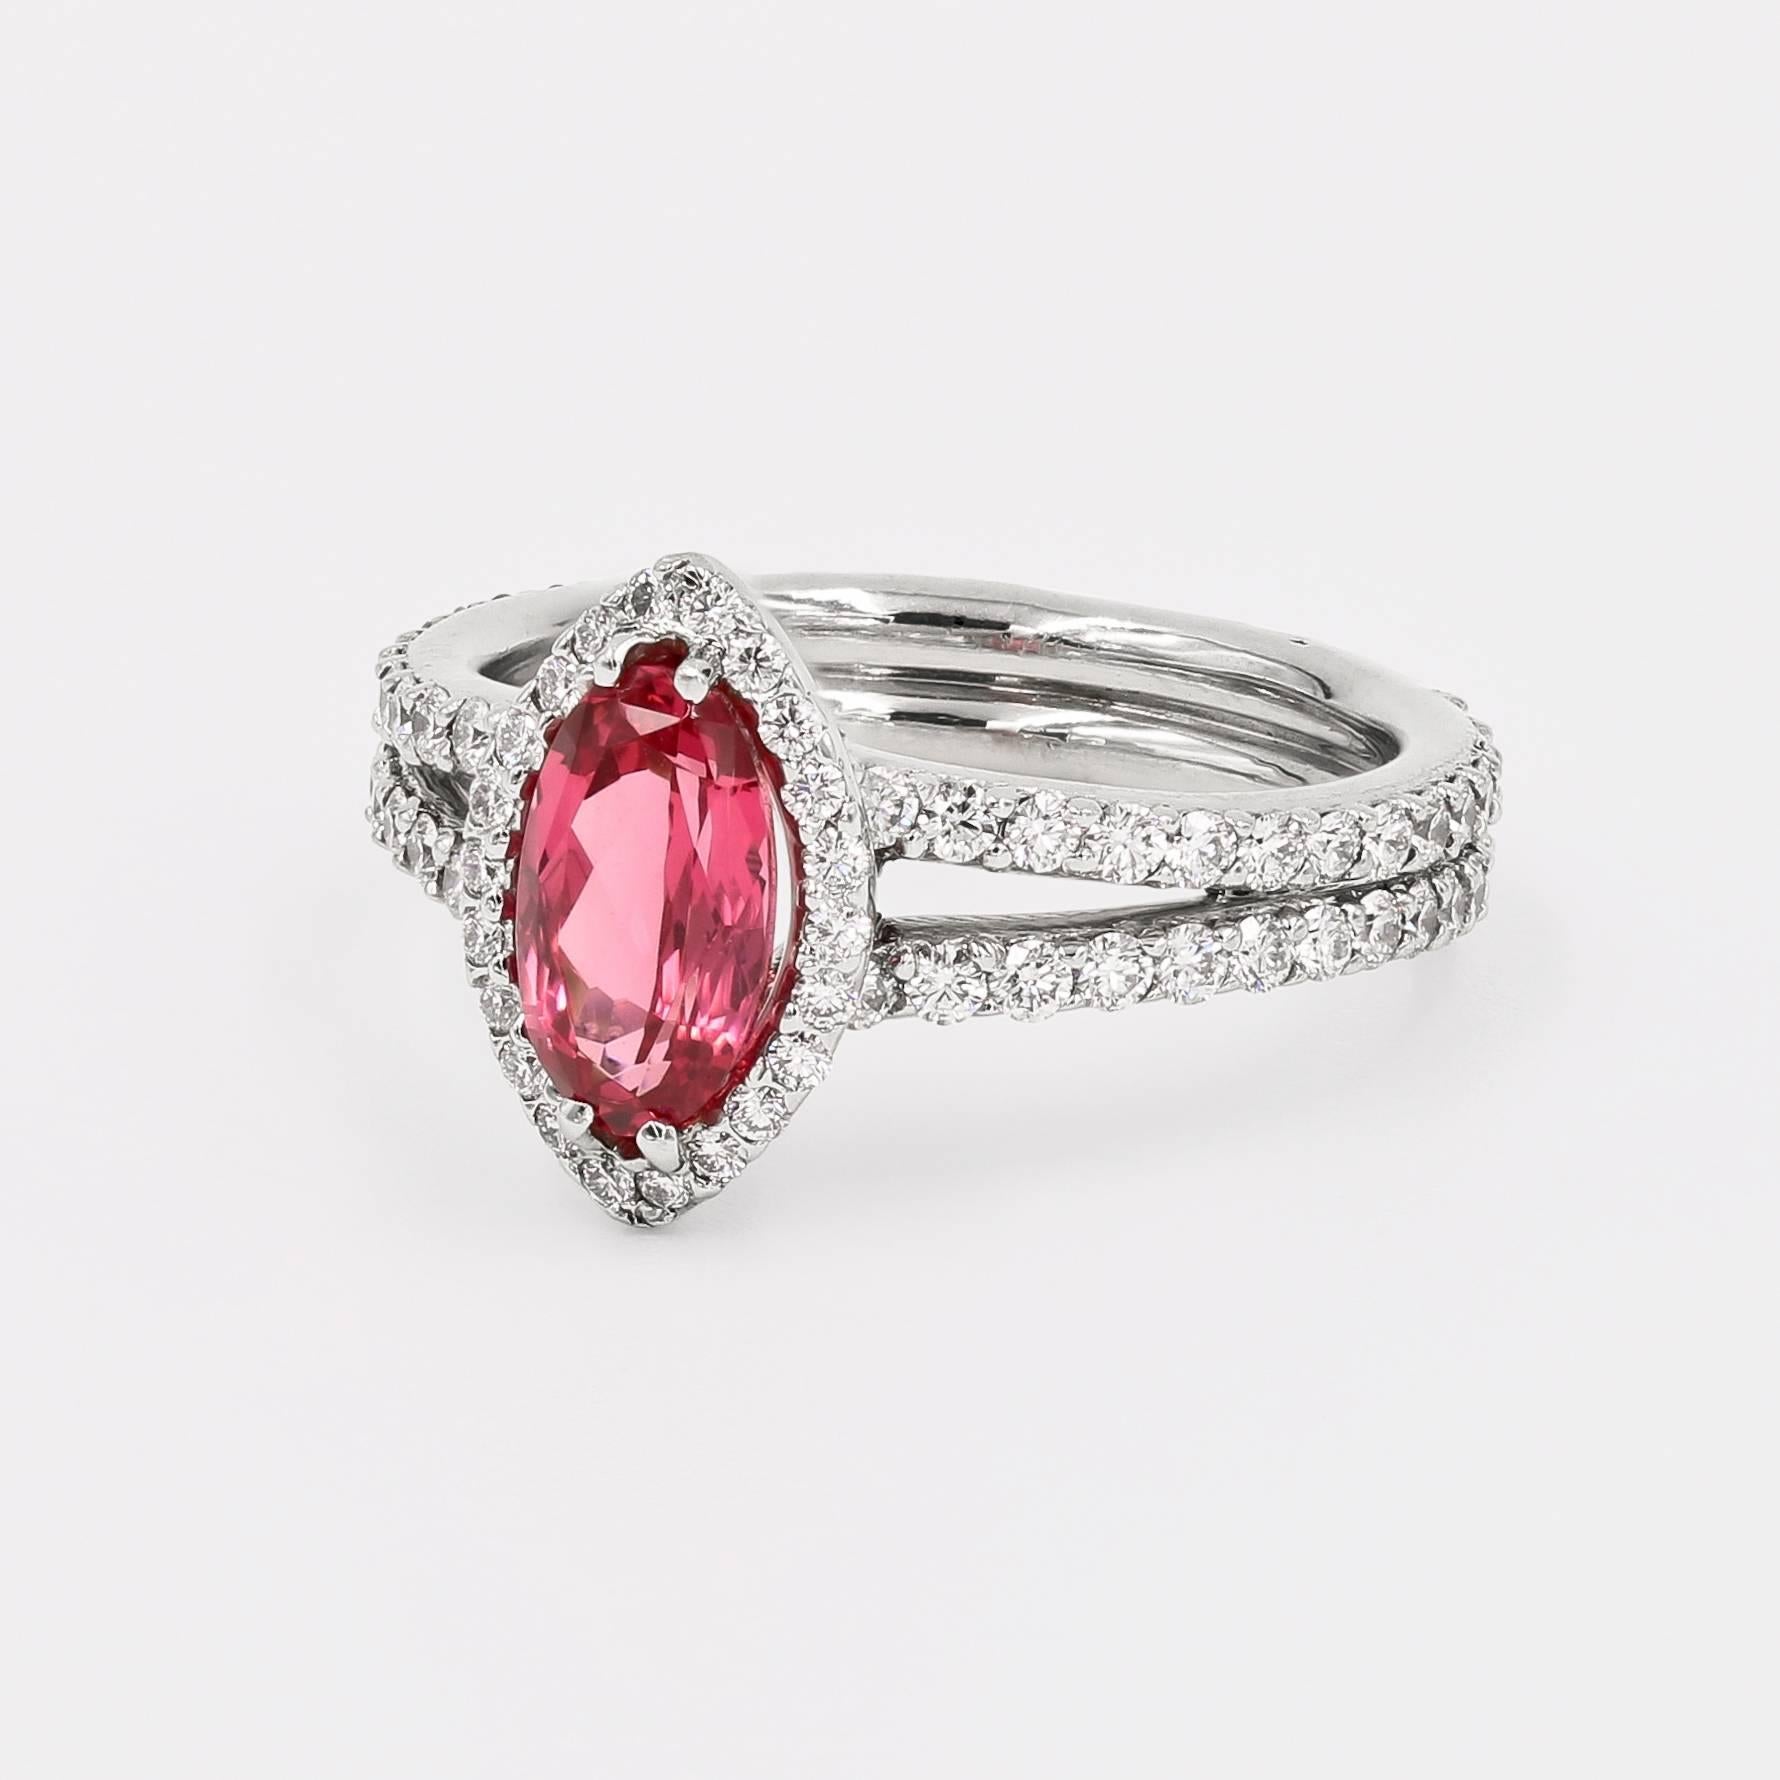 This elegant platinum ring contains a center 1.22cts. oval vivid pink spinel from Tanzania. Around the center and the entire shank are 110 ideal cut round diamonds=  1.12cts. t.w. (diamonds are G/VS)

Finger size is a 6, but can be sized to